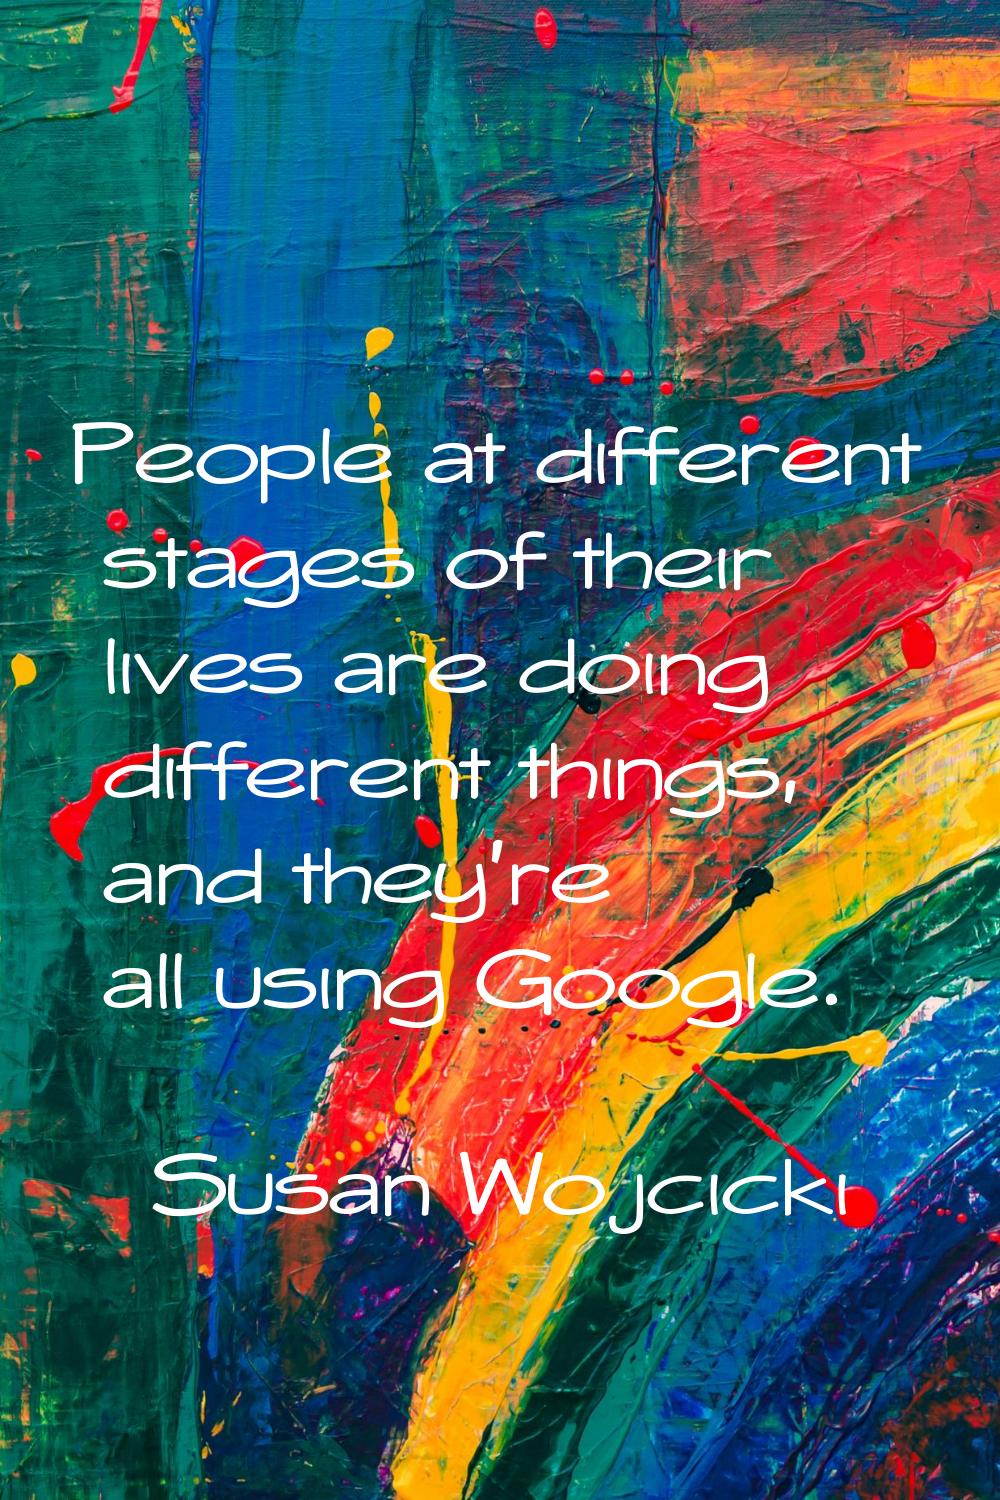 People at different stages of their lives are doing different things, and they're all using Google.